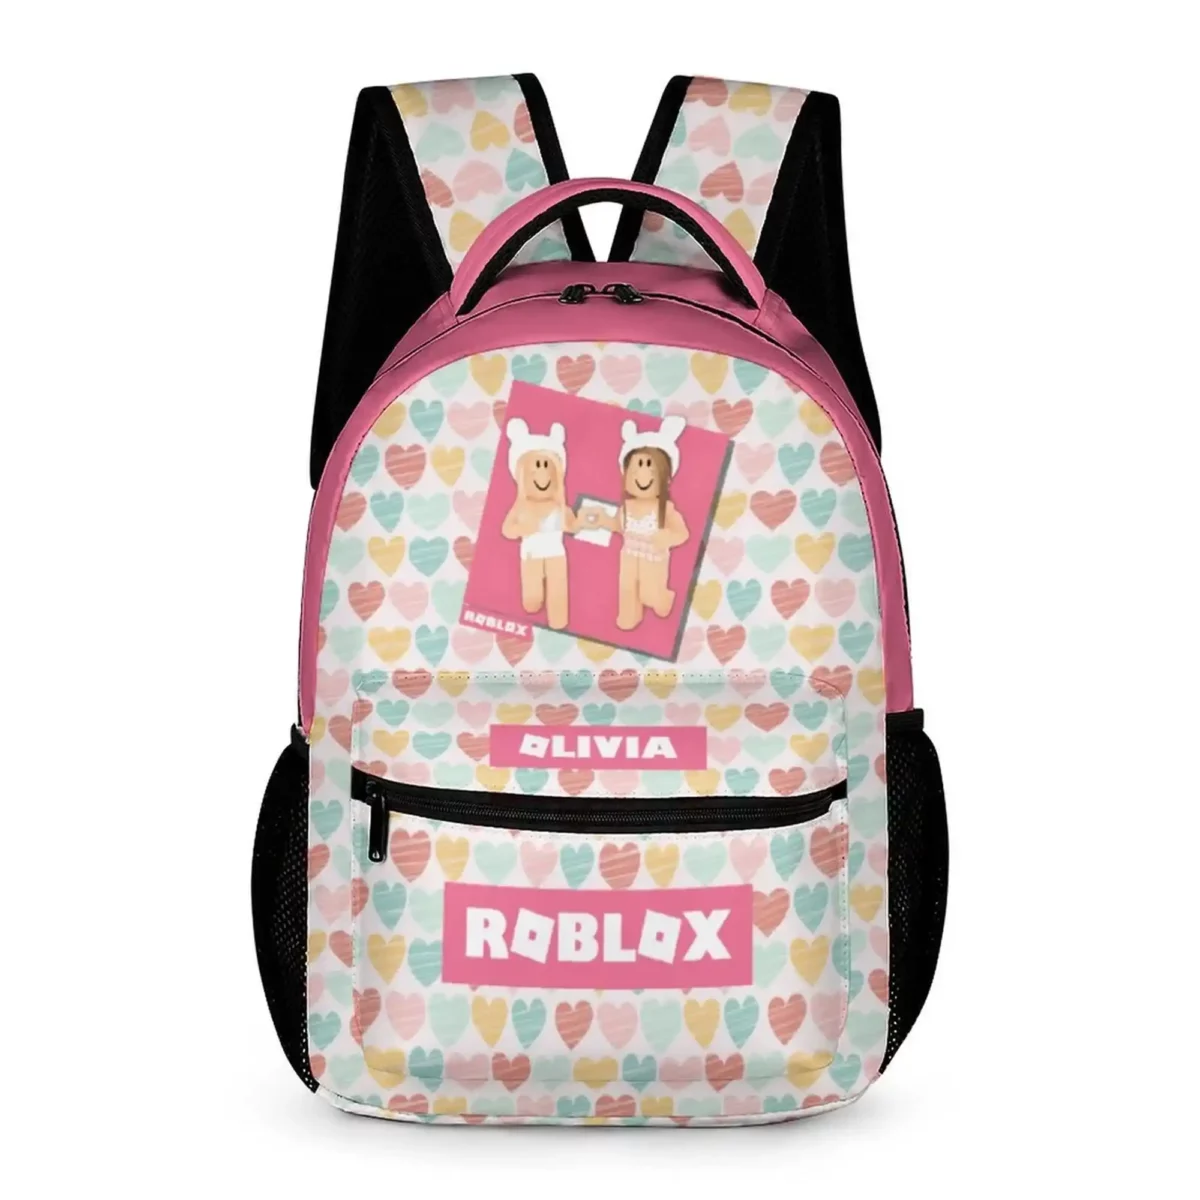 Personalized Roblox Girl’s Backpack with Pastel Hearts Background Cool Kiddo 12